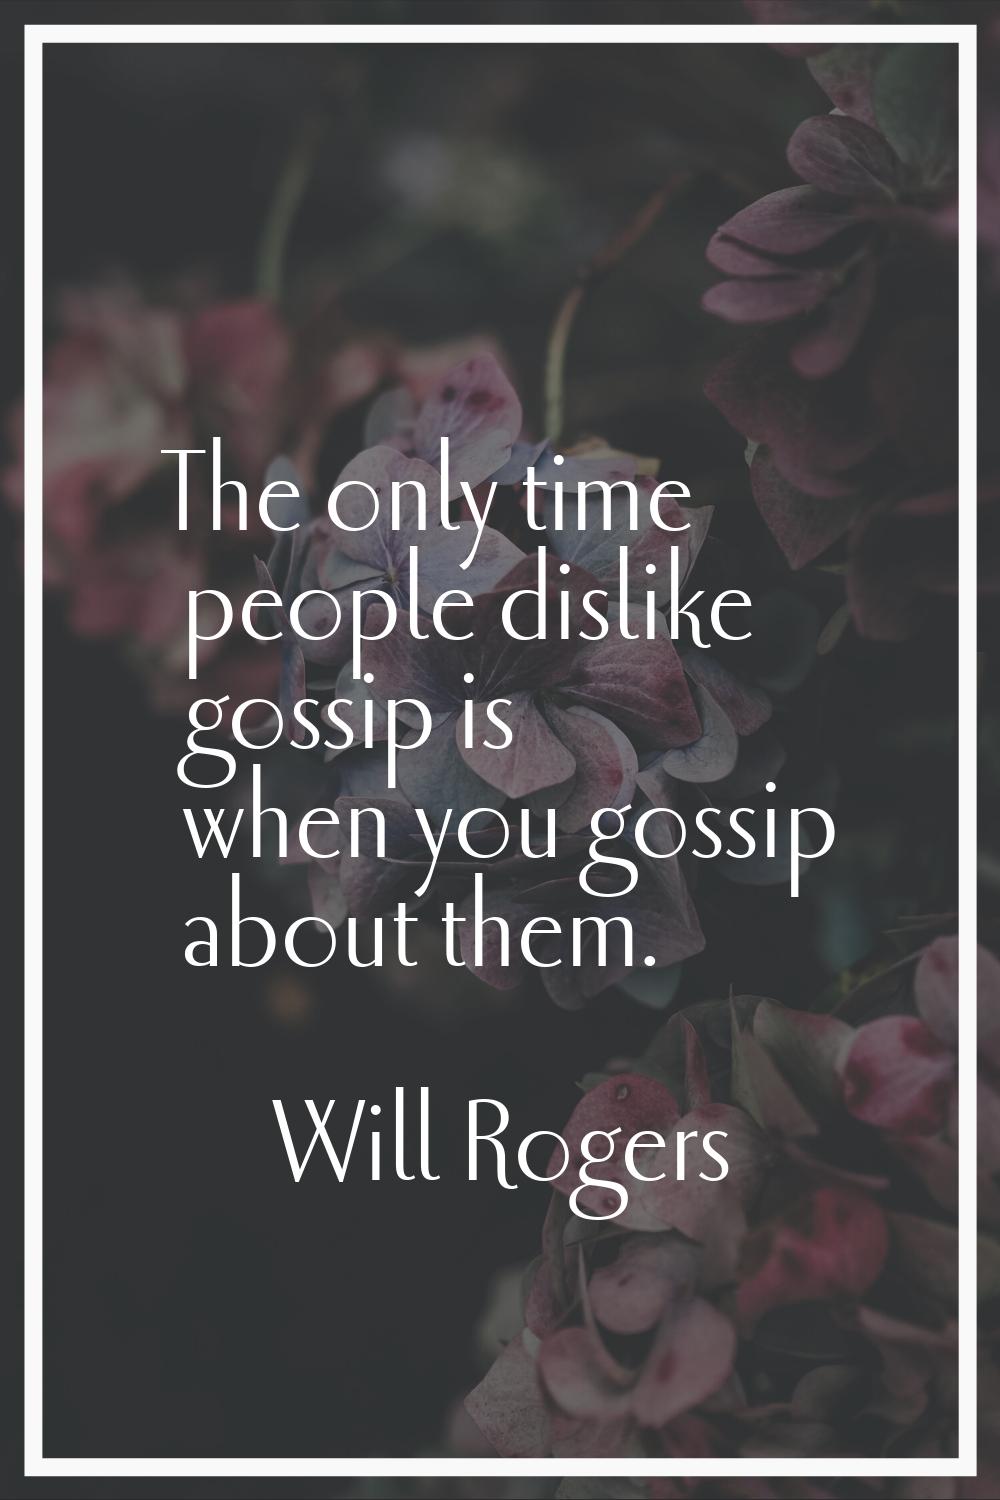 The only time people dislike gossip is when you gossip about them.